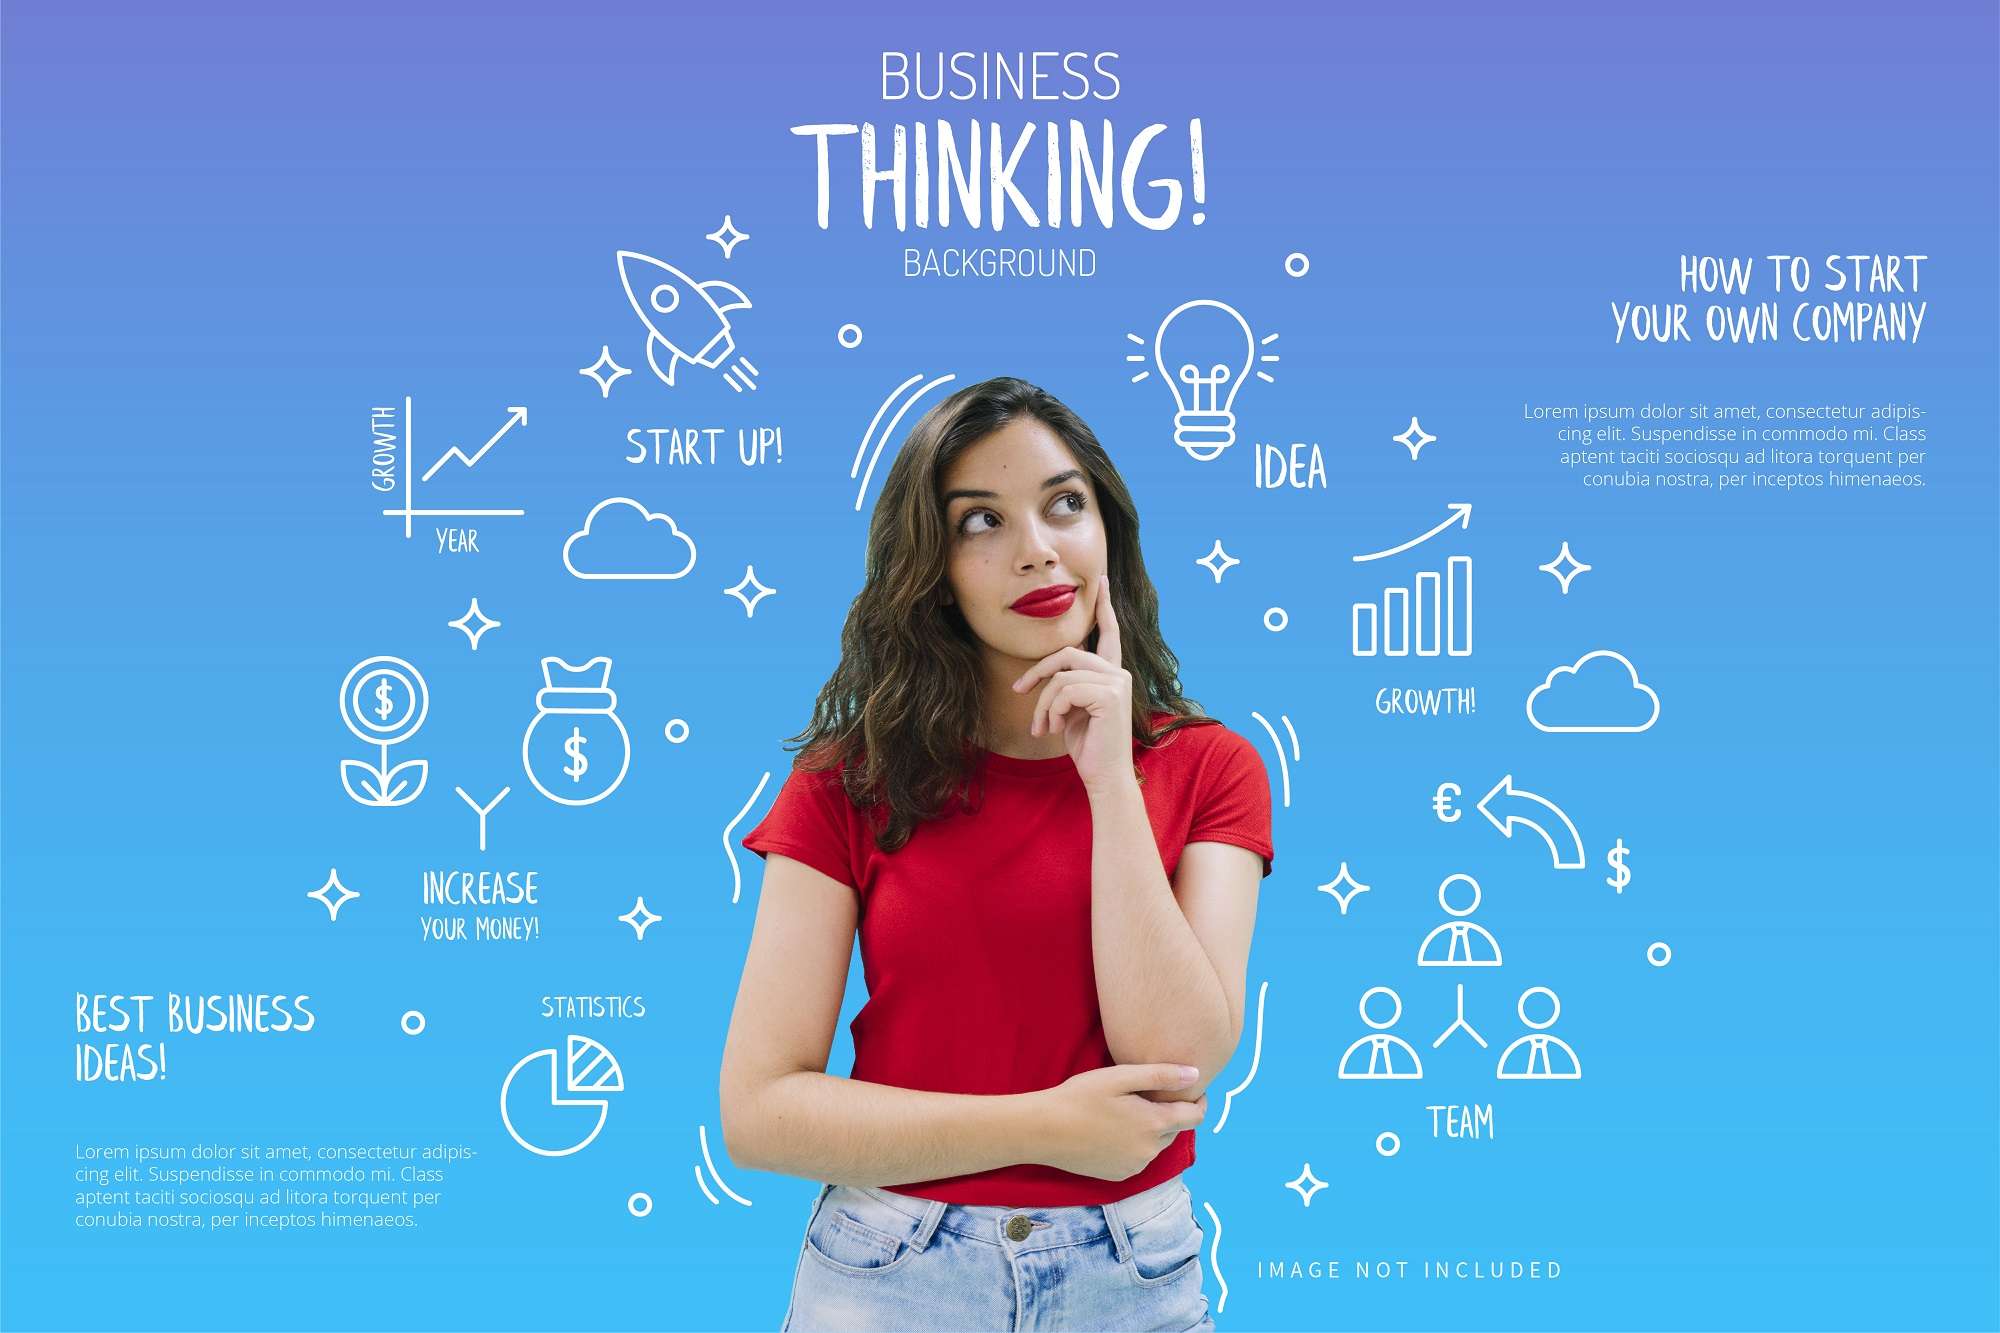 Girl in Startup Thinking concept image